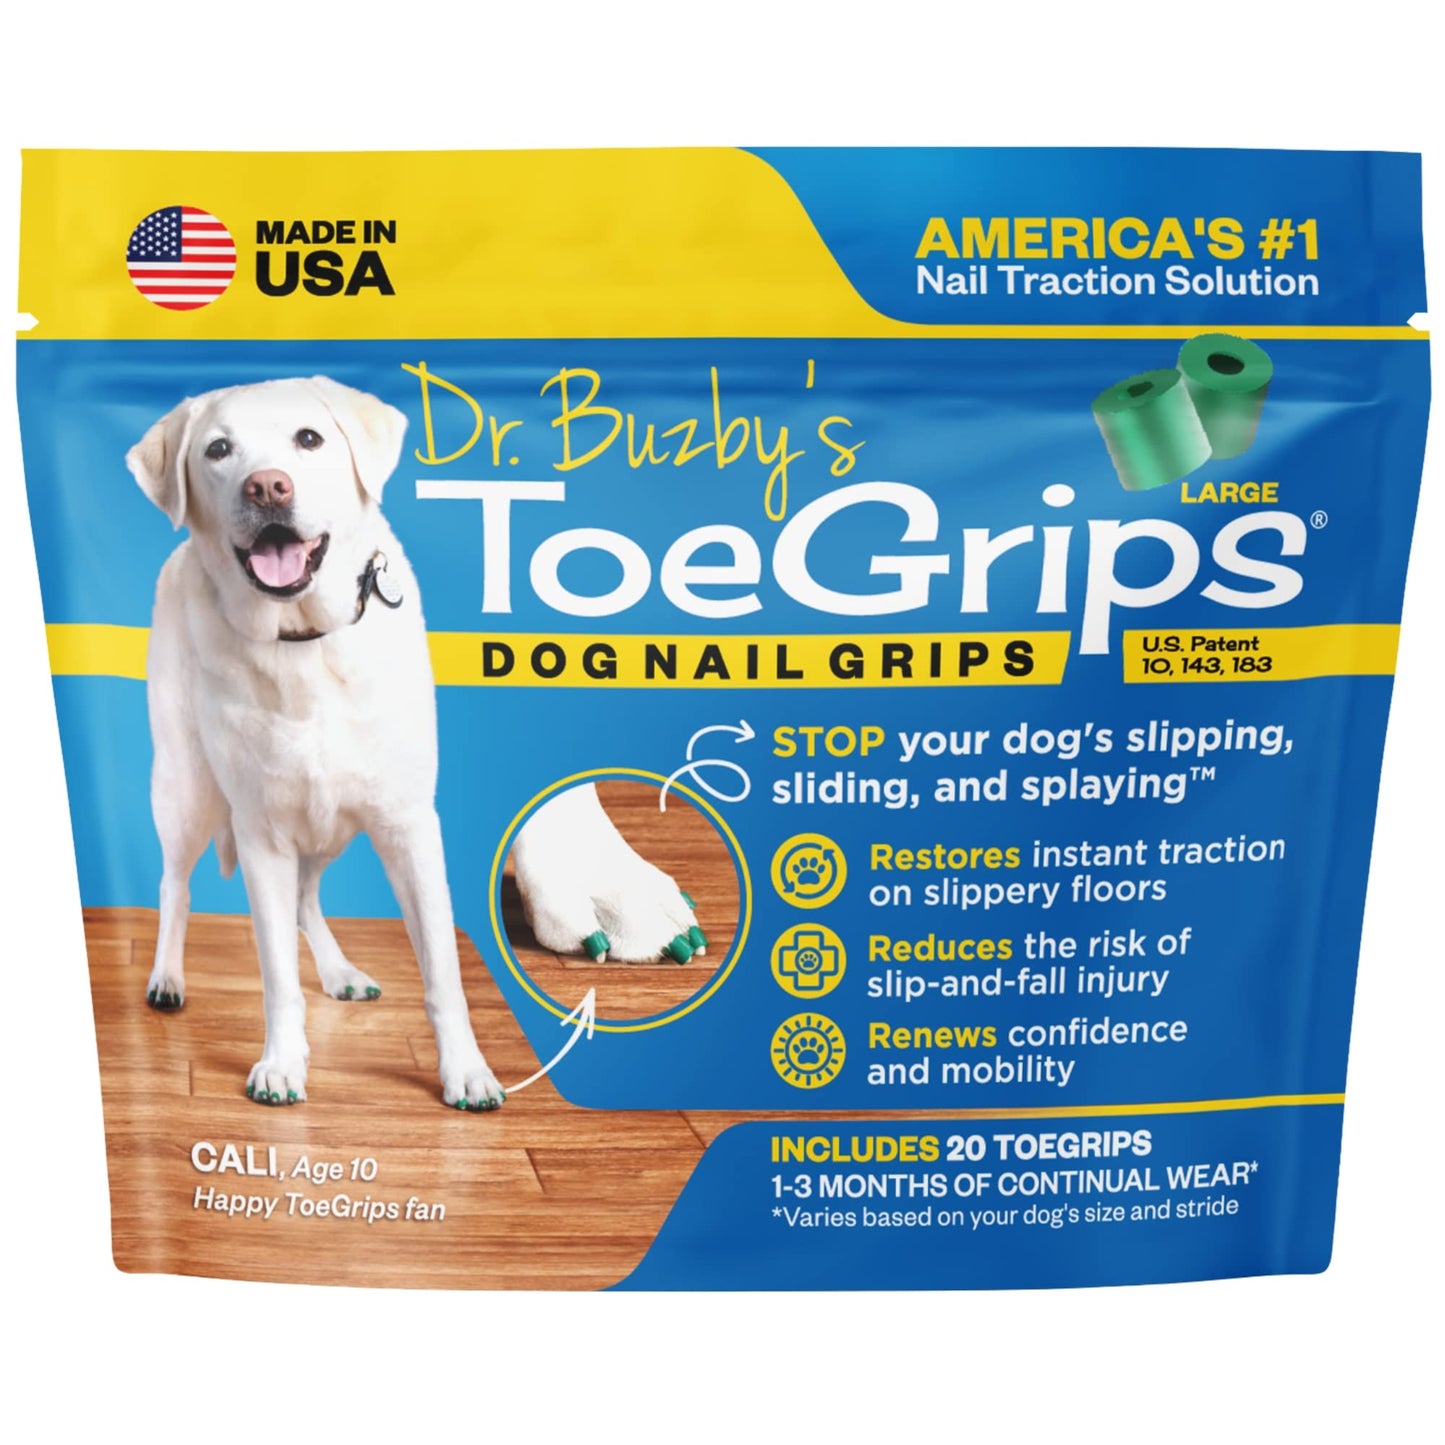 Dog Anti Slip Relief - Dog Grippers for Senior Dogs - Stop Sliding Instantly